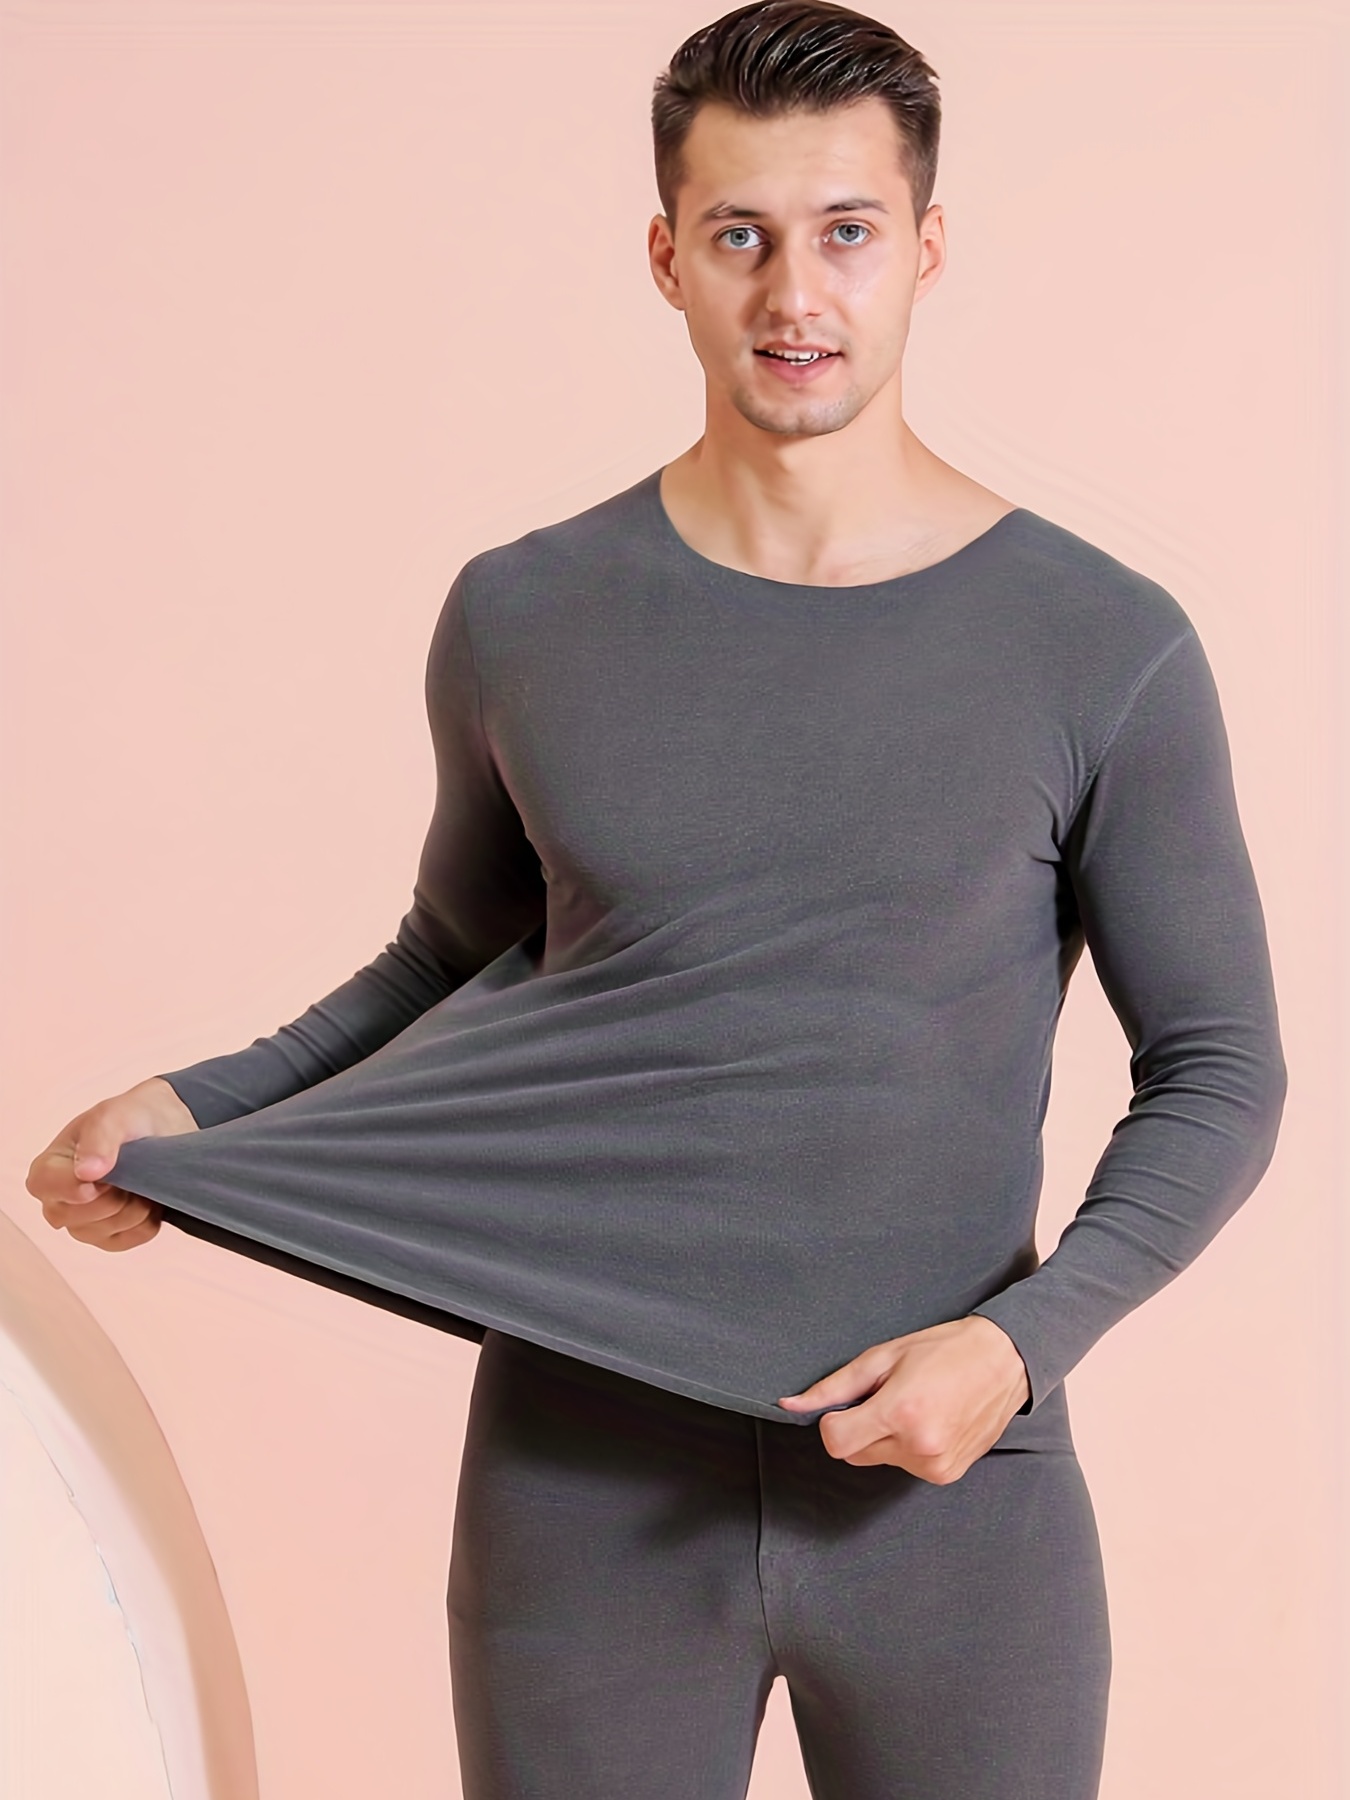 Winter Thermal Underwear Set For Men Thickened Bottom Shirt Long